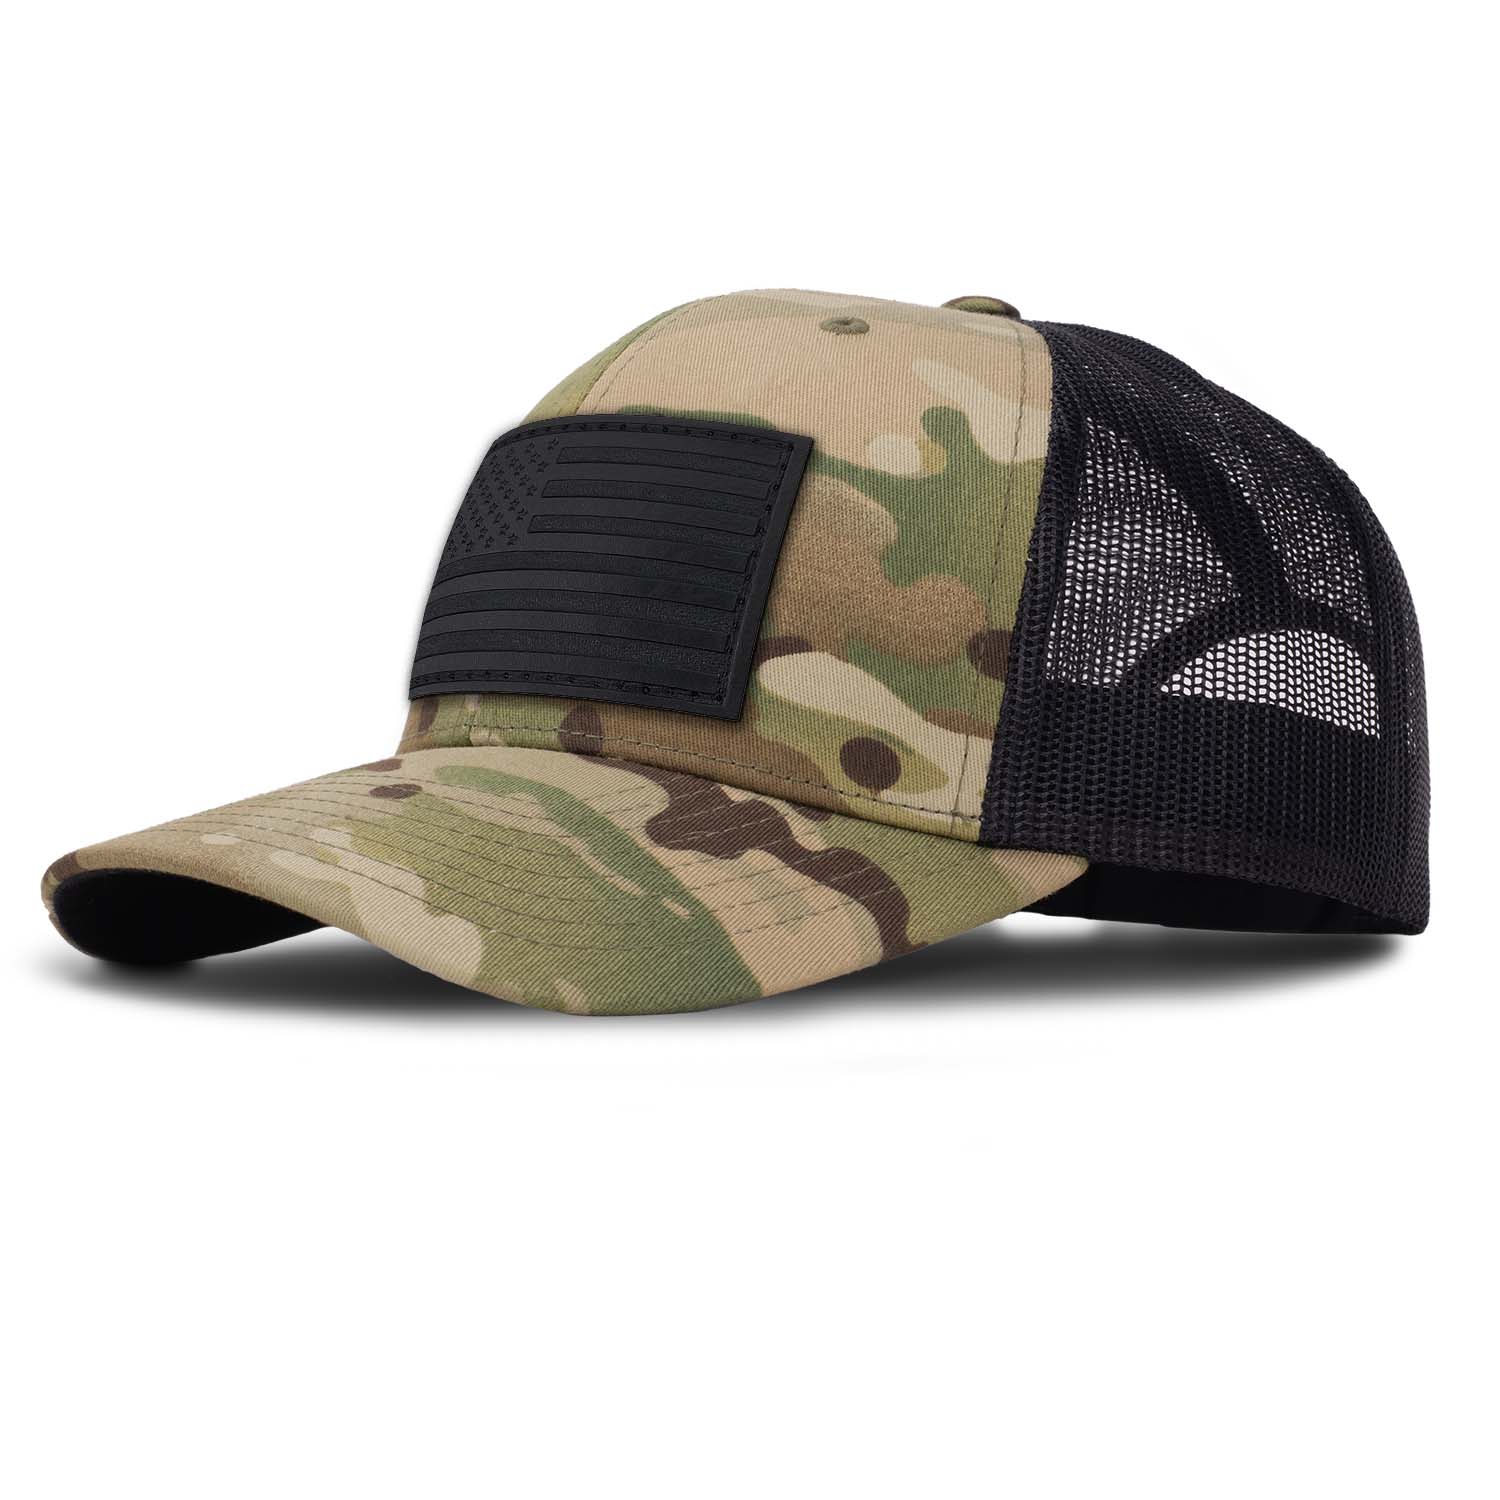 Revolution Mfg full grain black leather American Flag patch on a multicam camo with black mesh classic mid-profile, curved bill trucker hat